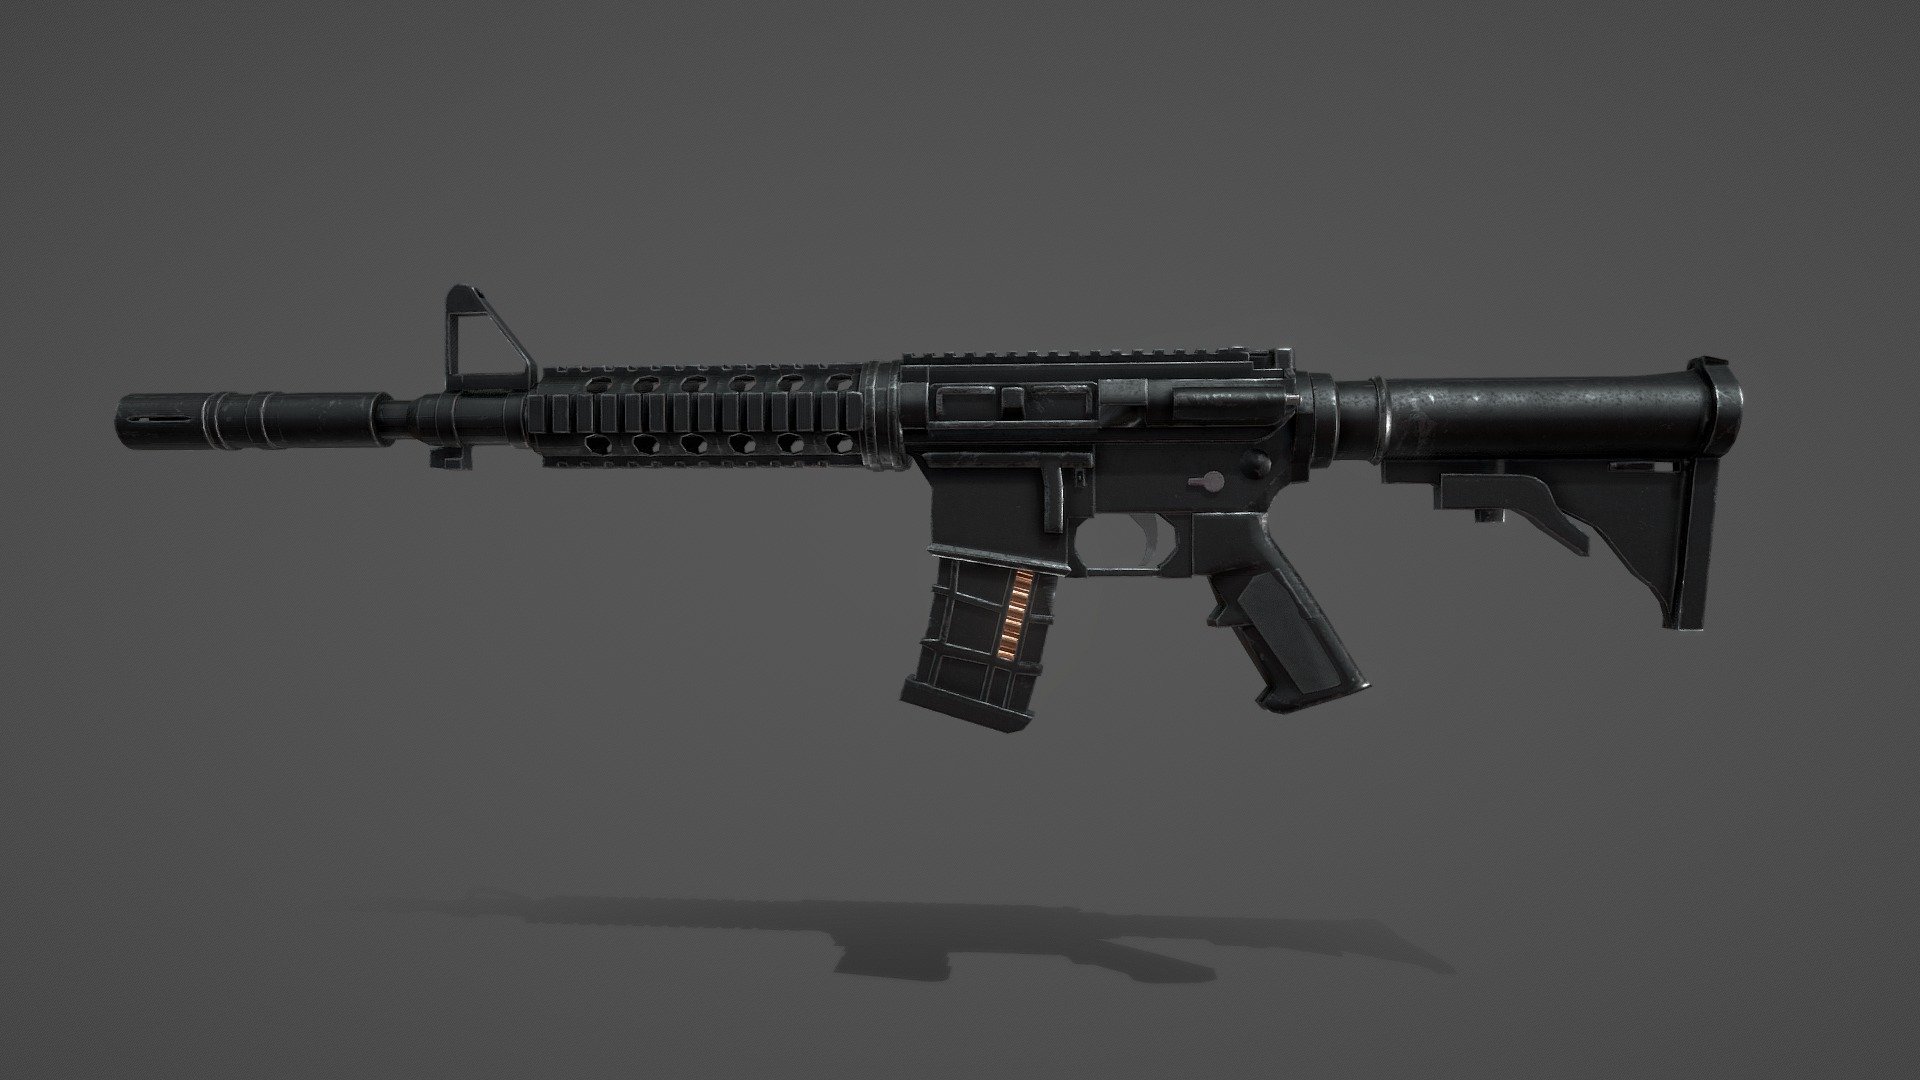 This is M4 Carbine Rifal used by United States Army. It has Realisic gun metal textures. Rigged version will be available soon, so stay tuned guys 3d model